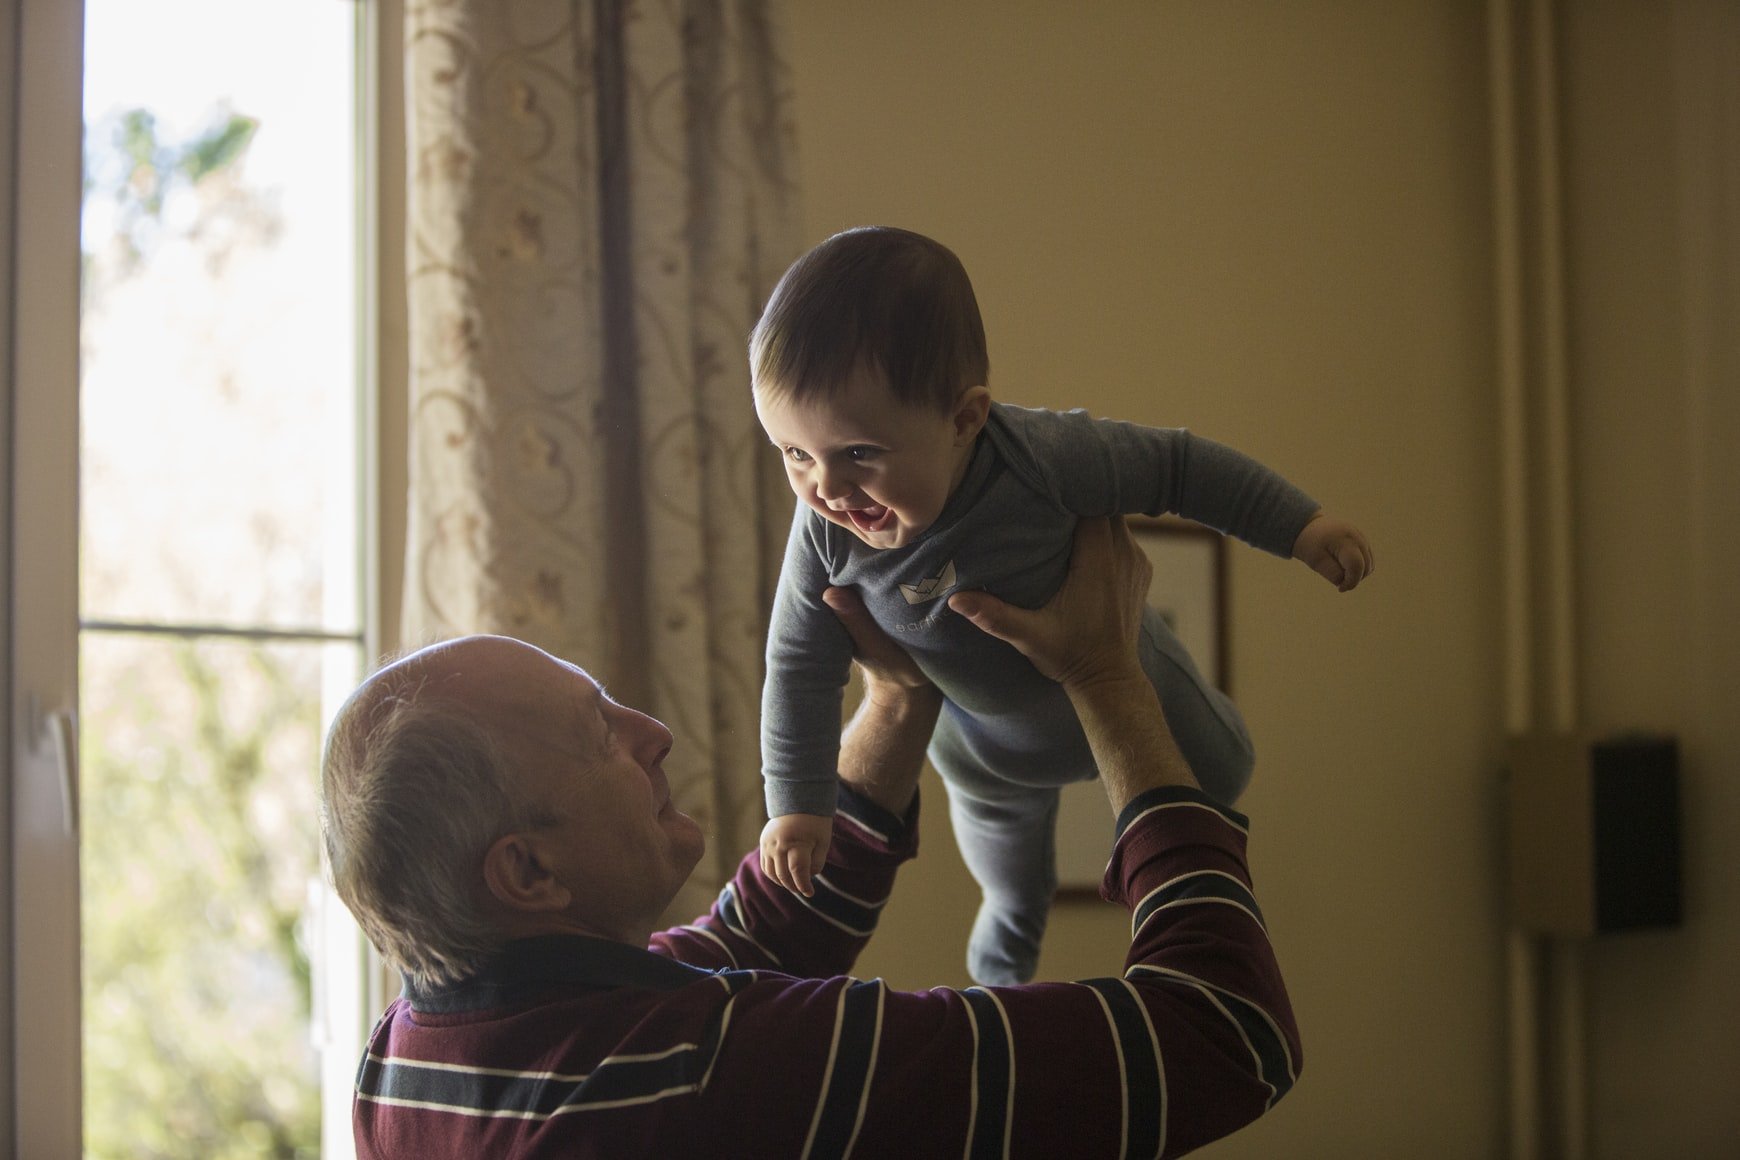 An older man pictured lifting a baby. | Source: Unsplash